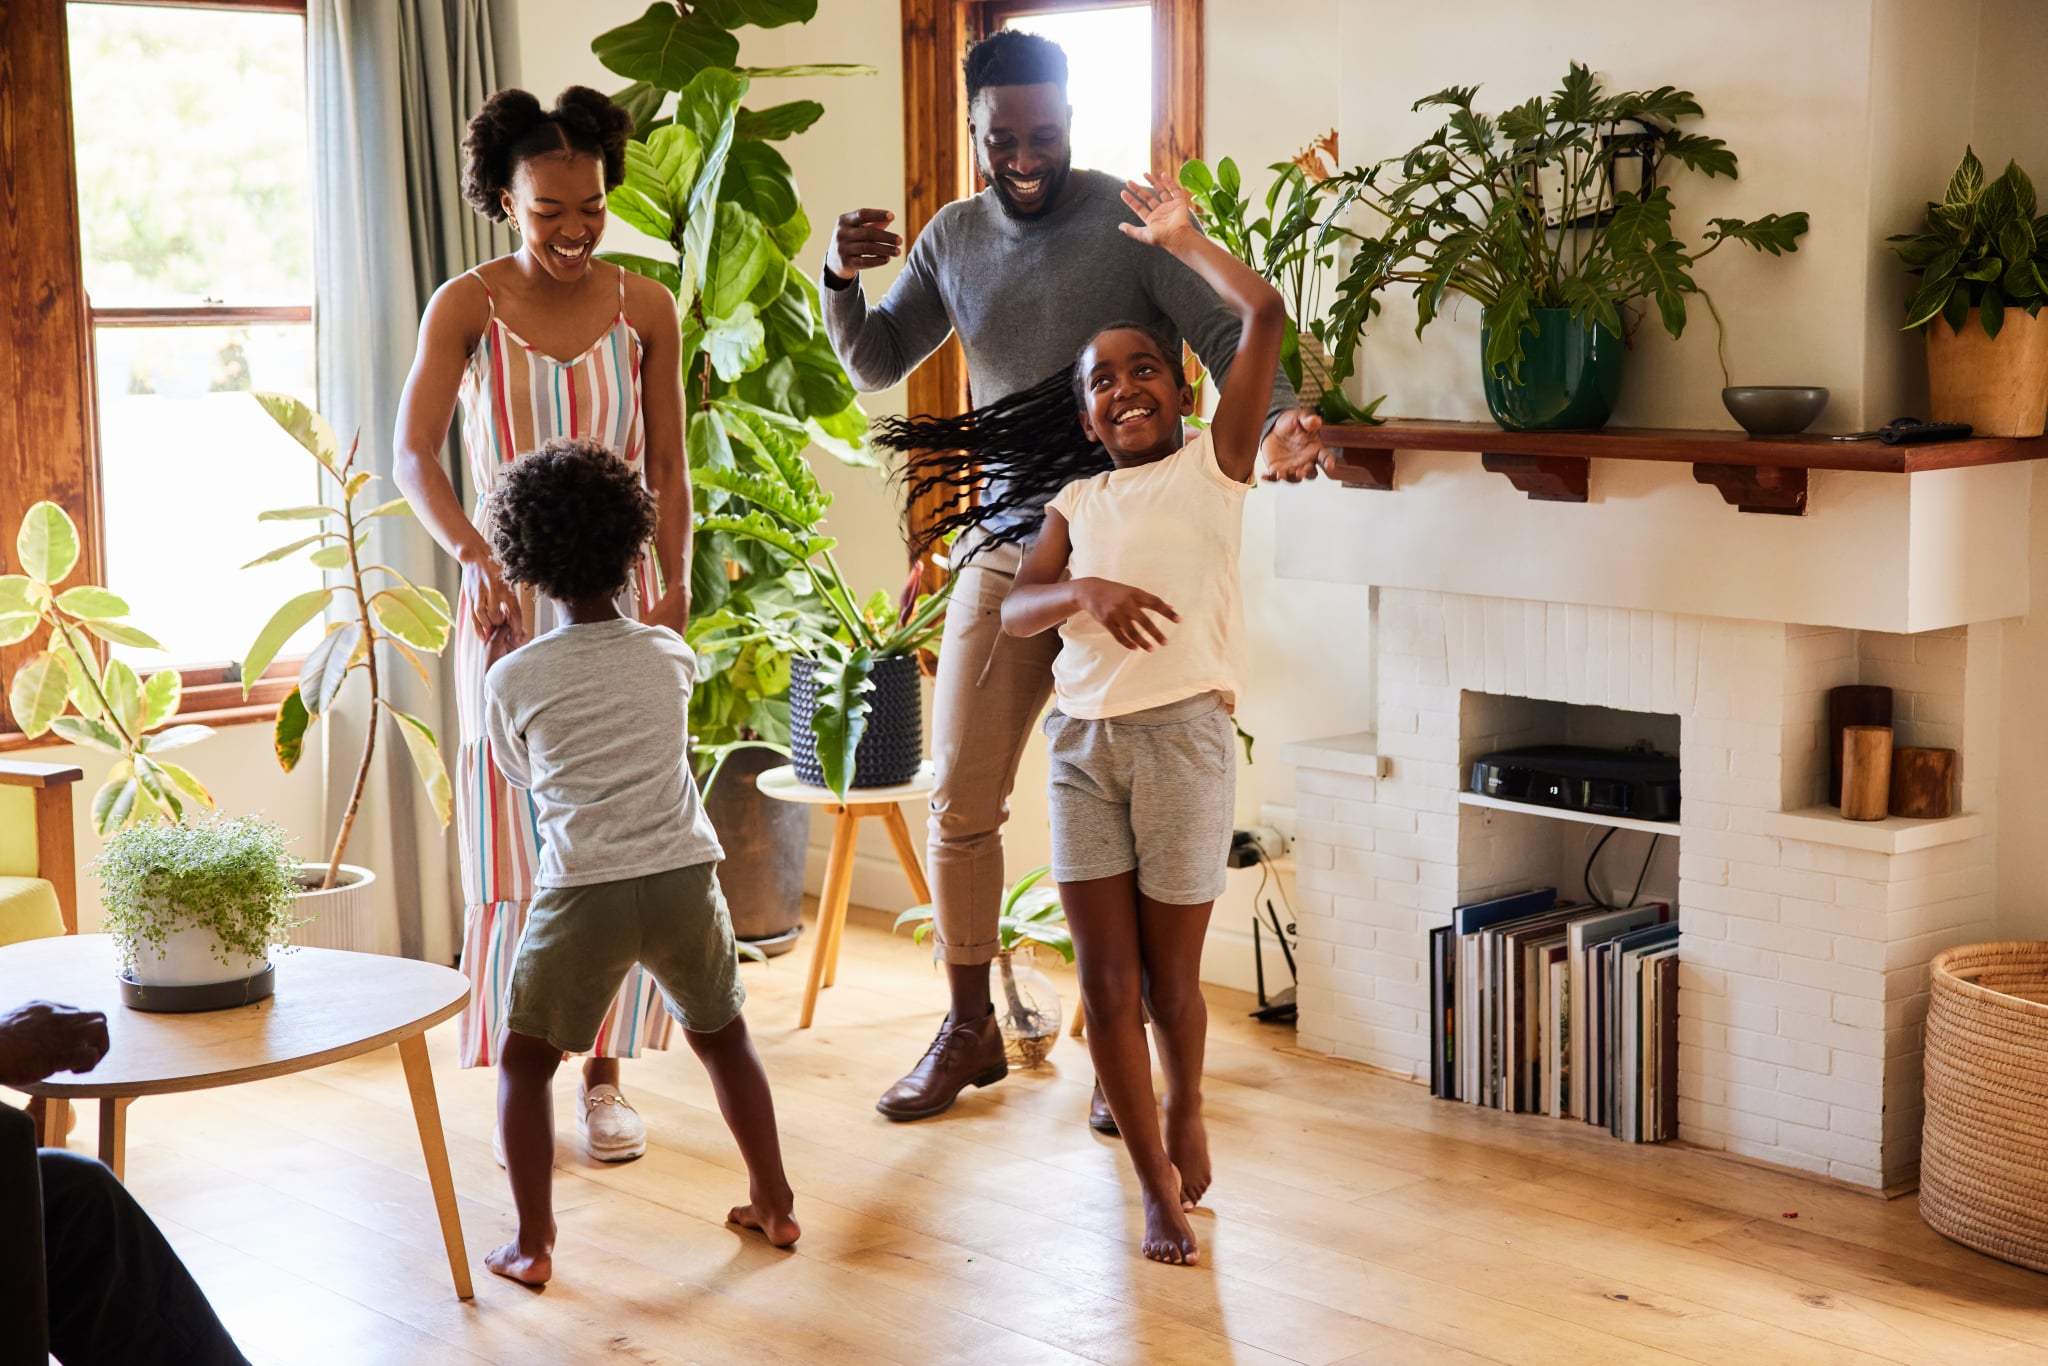 <p>Craft a playlist full of songs everyone loves and turn a kitchen or living room floor into a dance floor. Dance parties are a great way to get families with children and adults of all ages moving when local parks and backyards are too cold and soggy.</p>